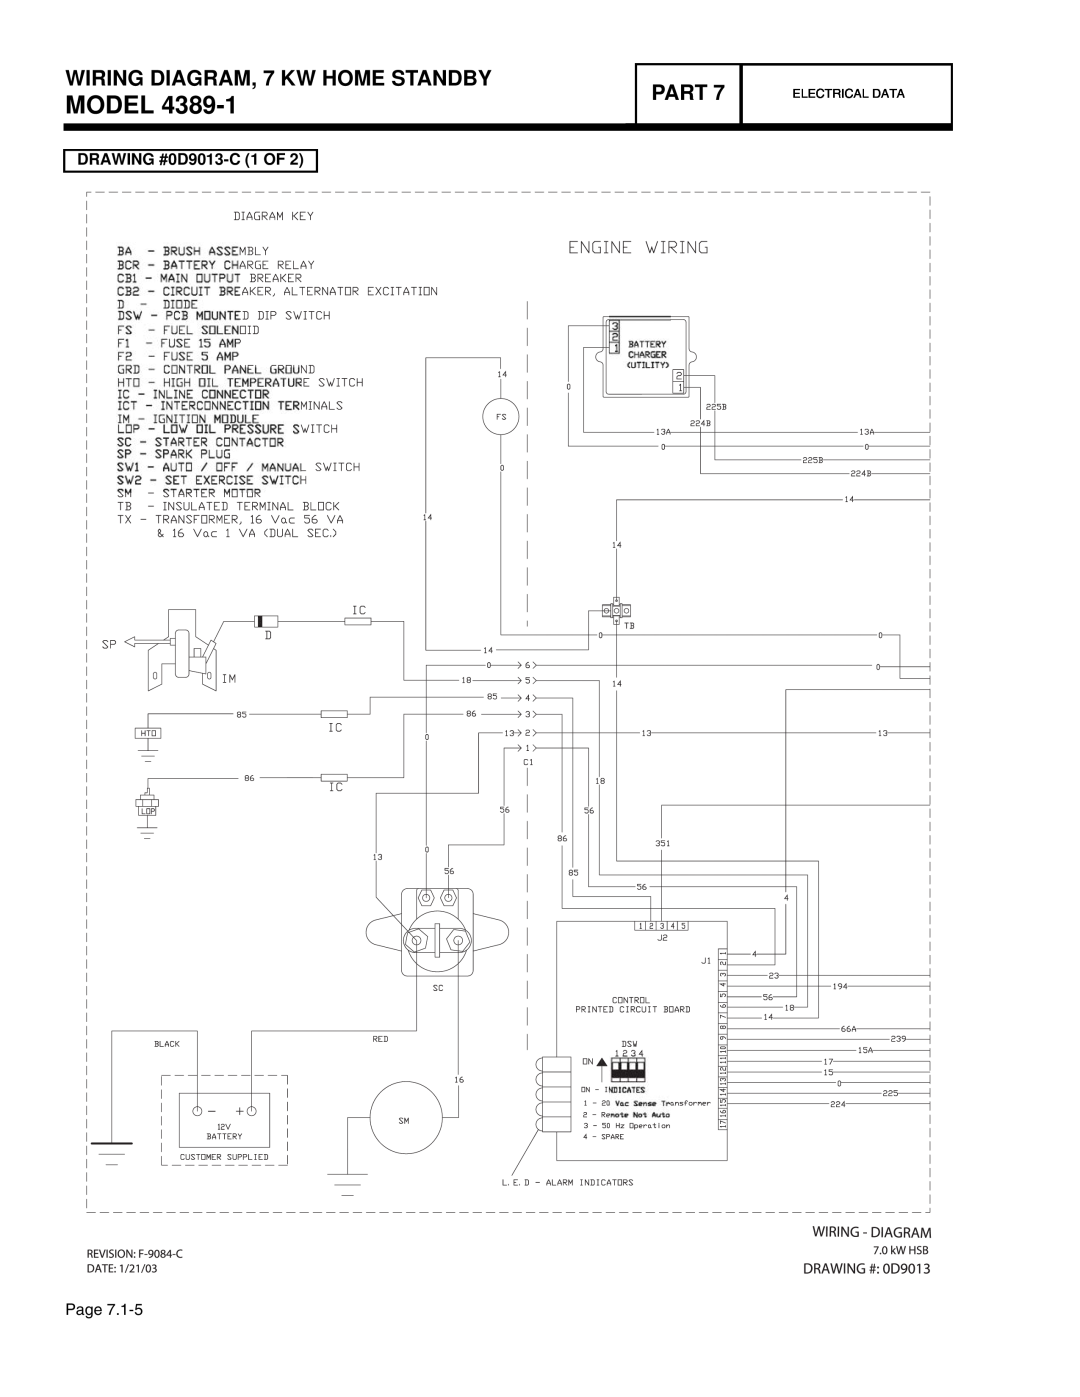 Guardian Technologies 4760, 4456 Model, WIRING DIAGRAM, 7 KW HOME STANDBY, Part, DRAWING #0D9013-C 1 OF, Electrical Data 